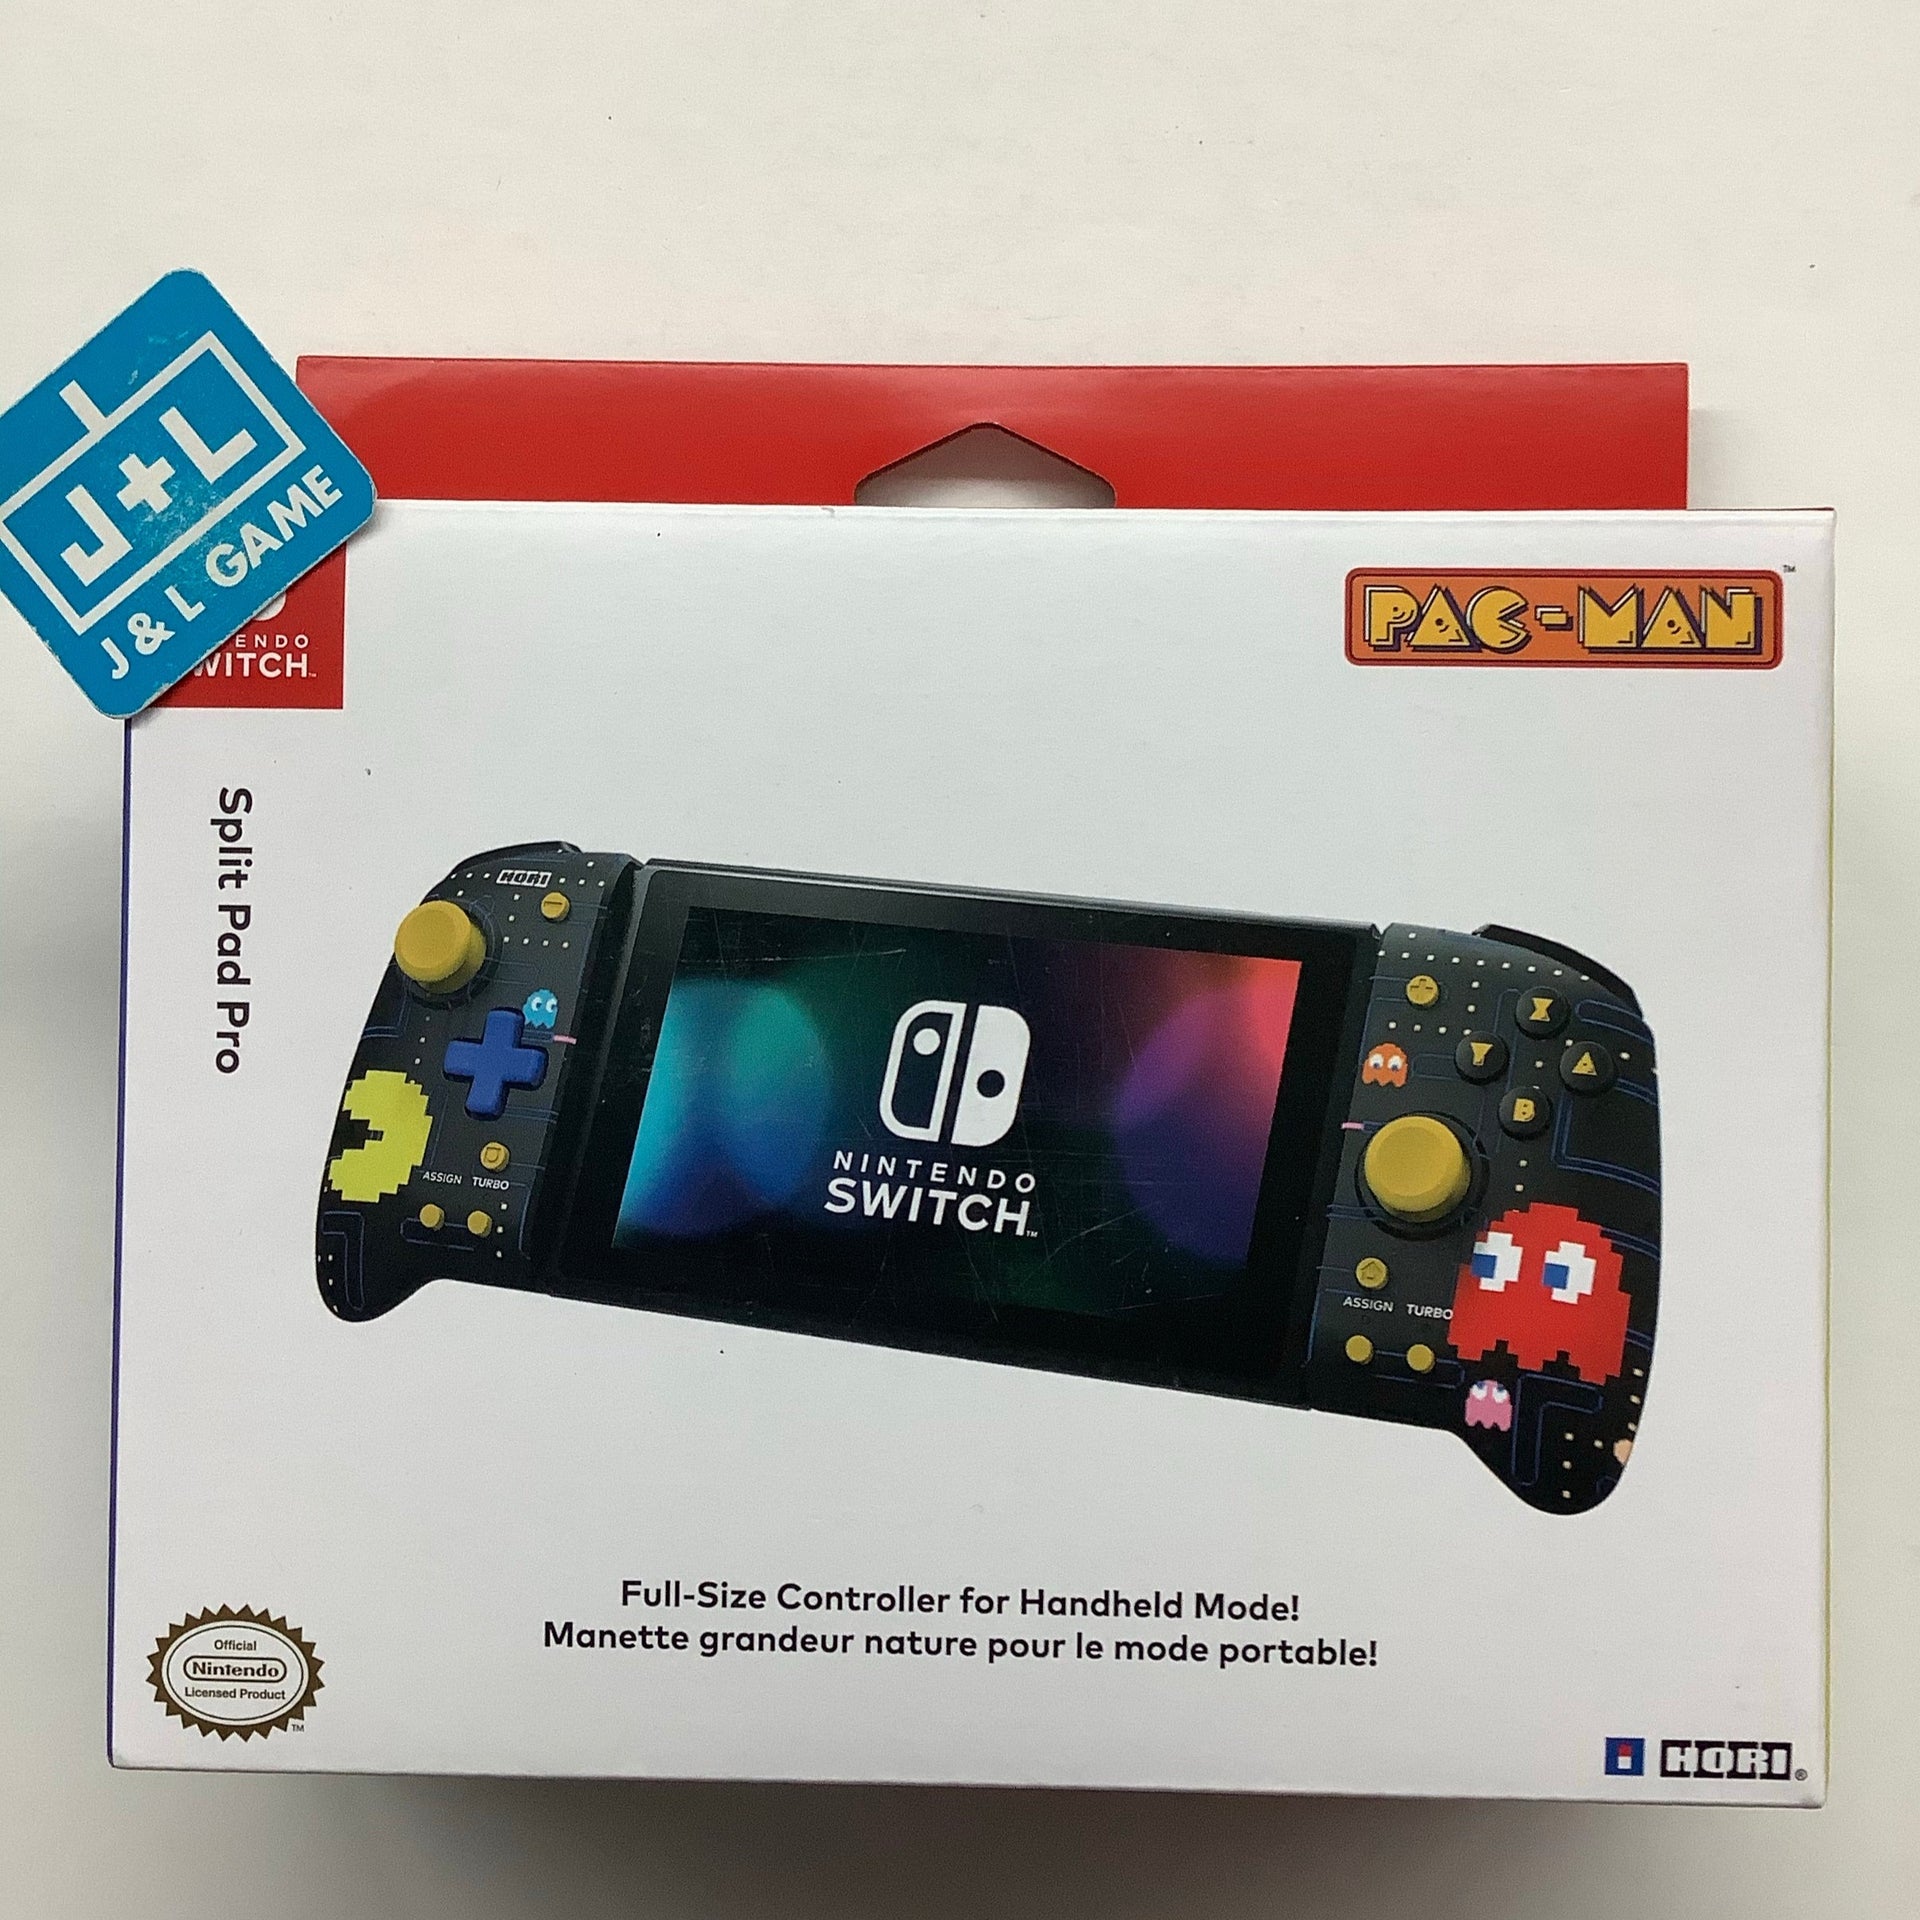 Split Pad Pro (Pac-Man Limited Edition) for Nintendo Switch